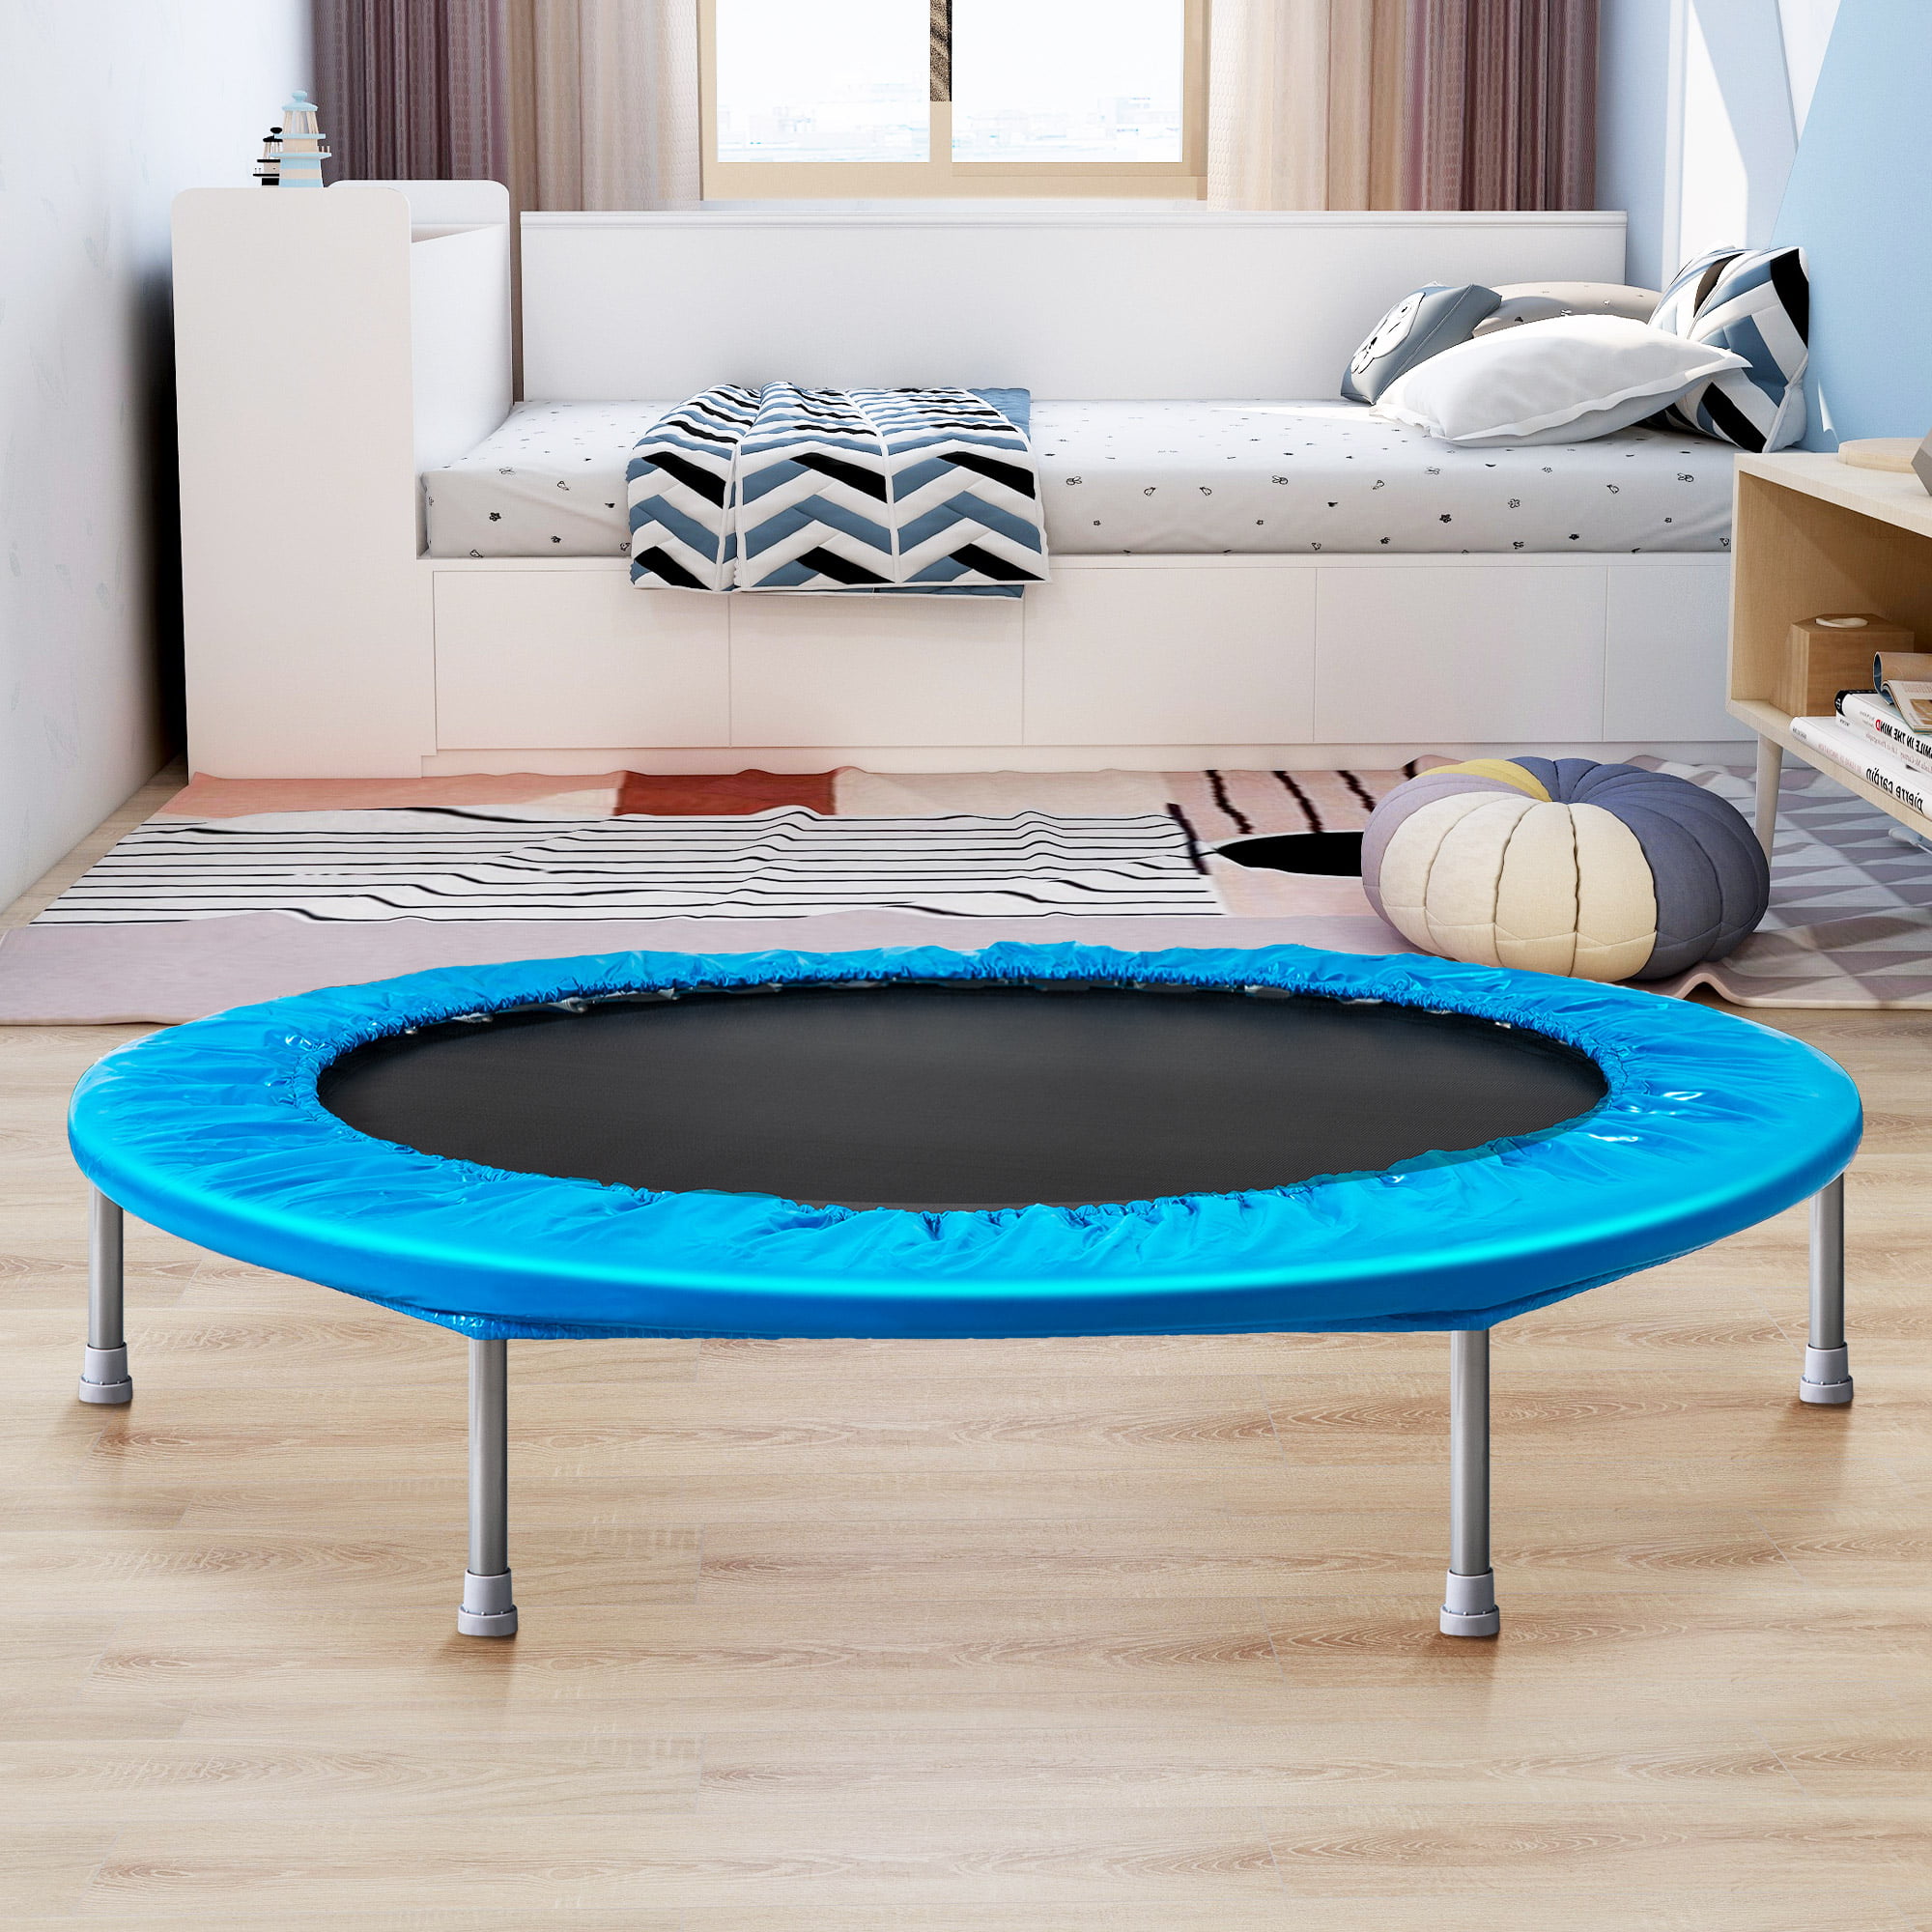 45in Trampoline Rebounder, BTMWAY Mini Indoor/Outdoor Folding Gym Fitness Trampolines, Kids Adults Folding Small Jump Exercise Rebounder Trampoline with Safty Pad, Max Load 180lbs, Blue, R071